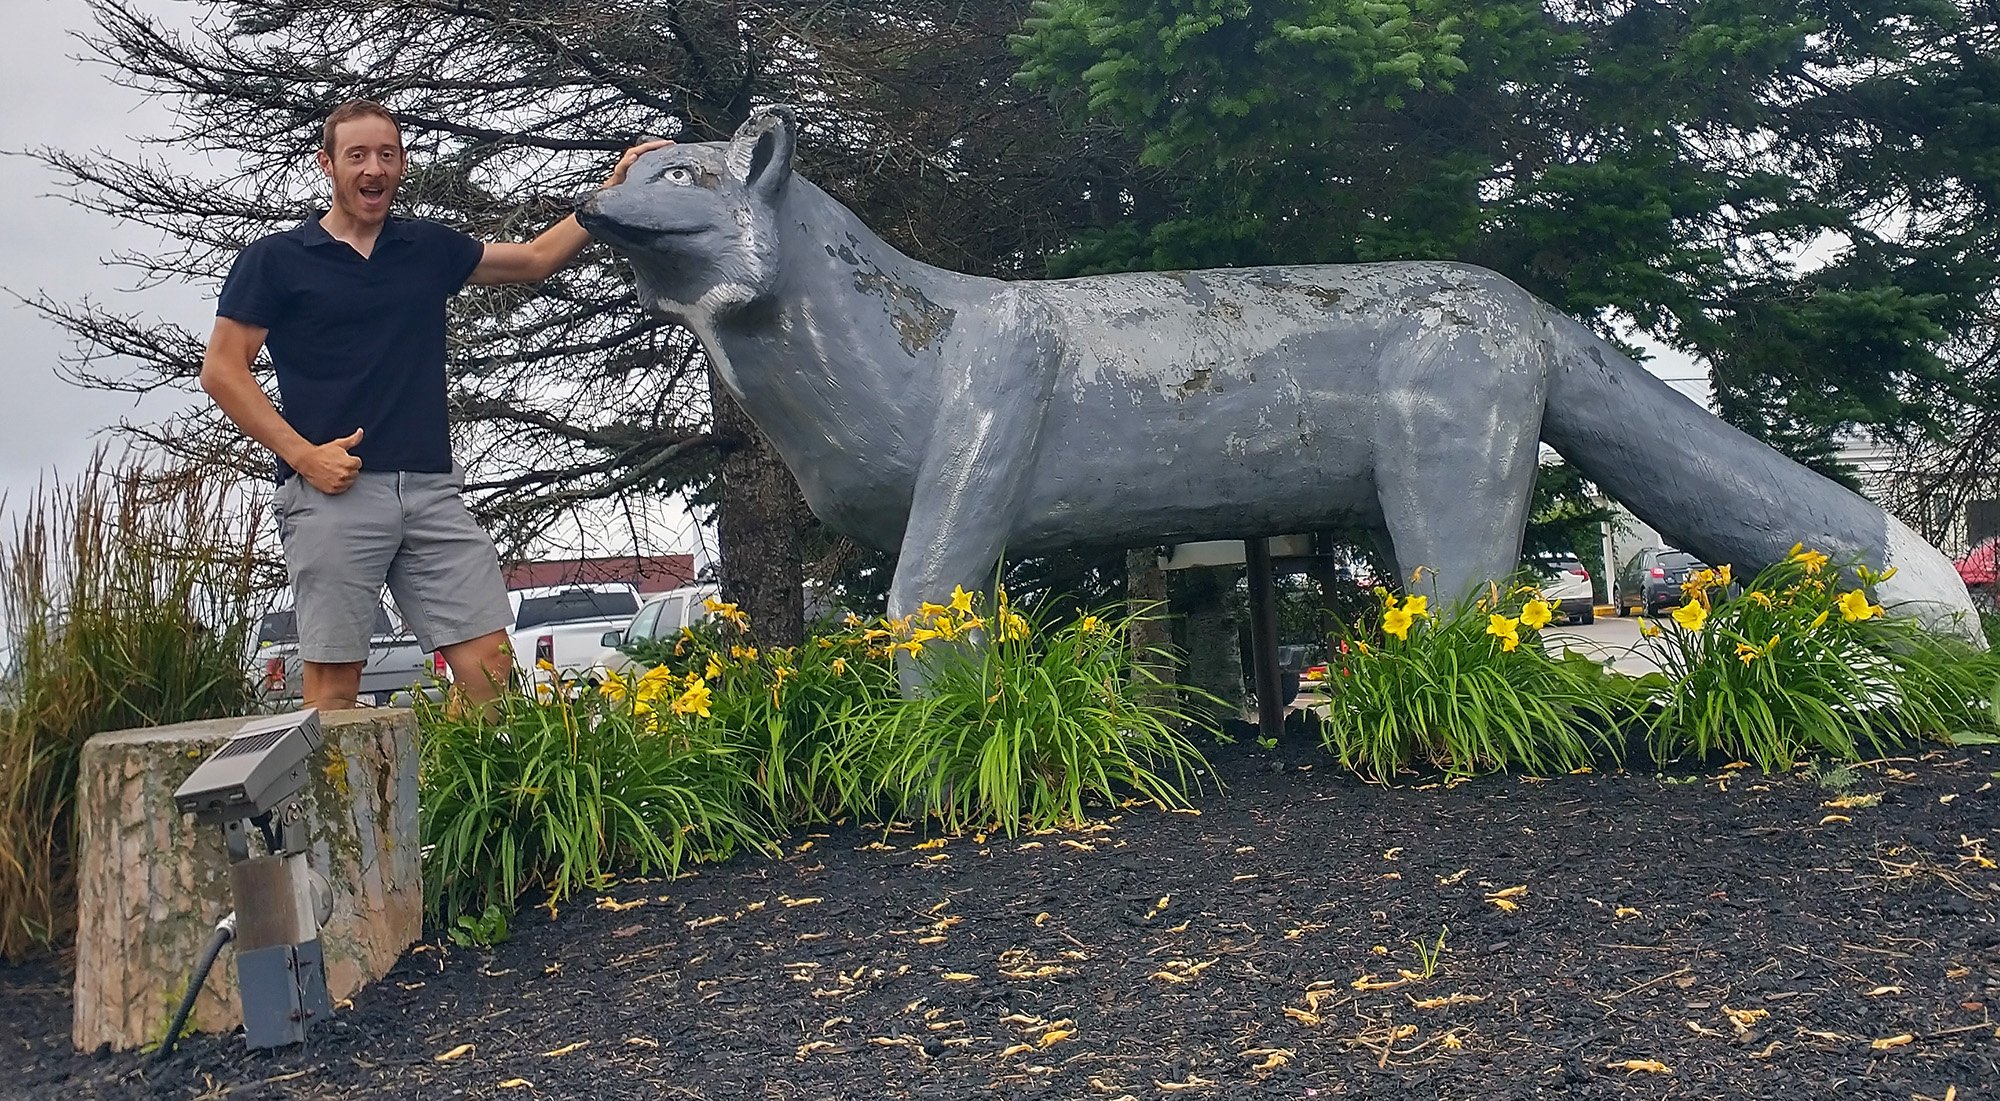 20 minutes outside Moncton you will find the world's largest Silver Fox. Some say it just lost its paint. 